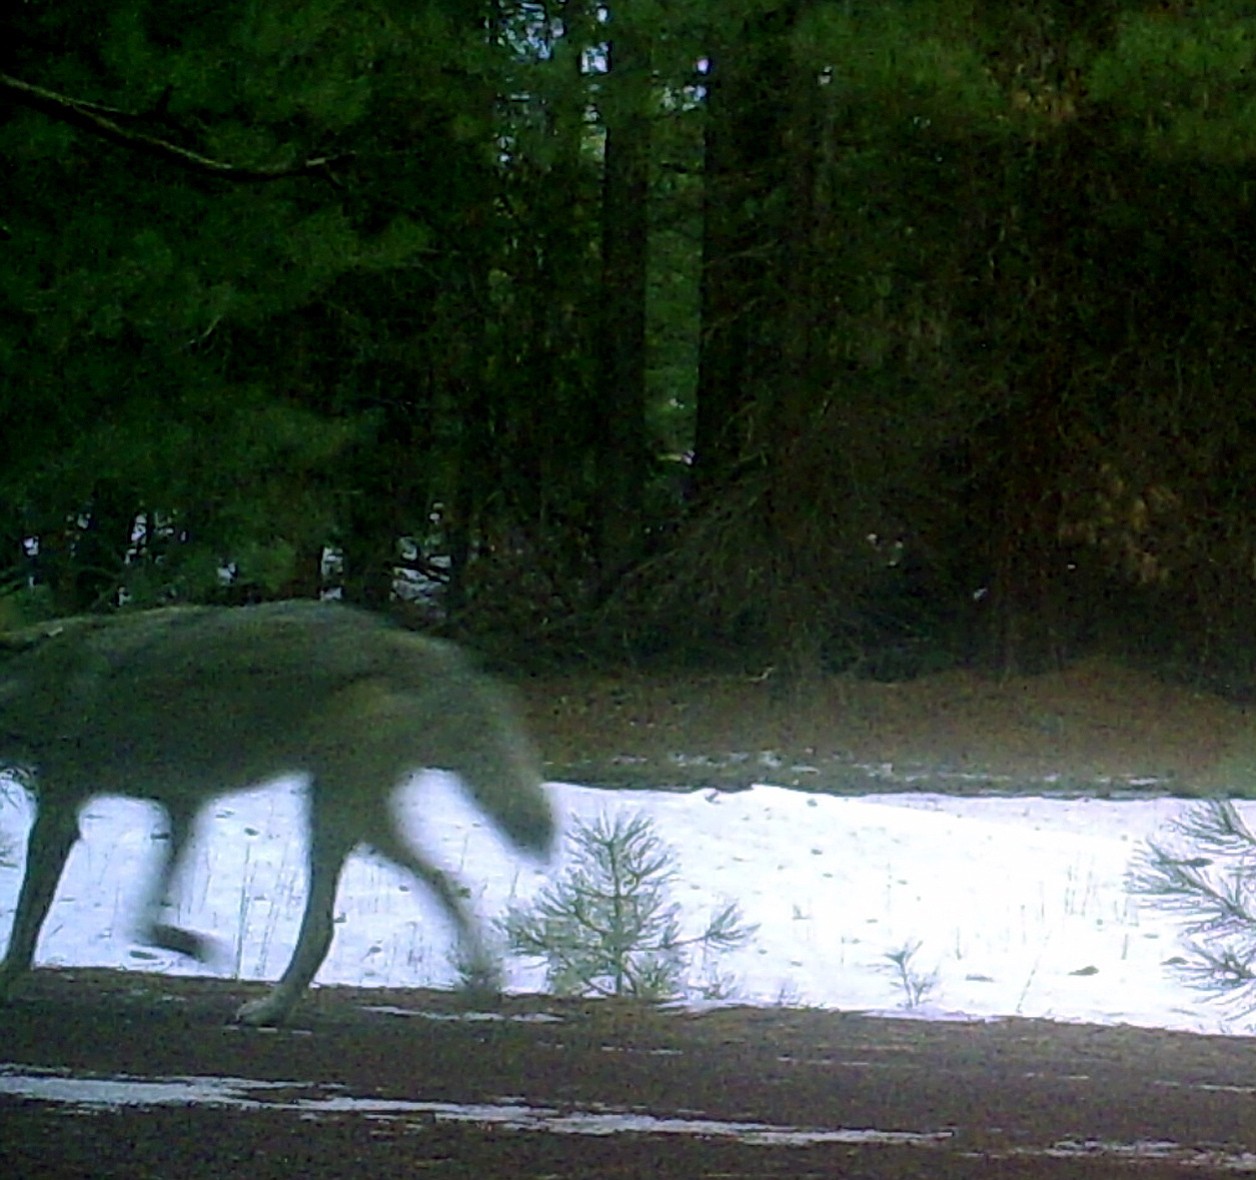 A wolf was caught Jan. 5 by a camera in the timberlands west of Keno, Ore.